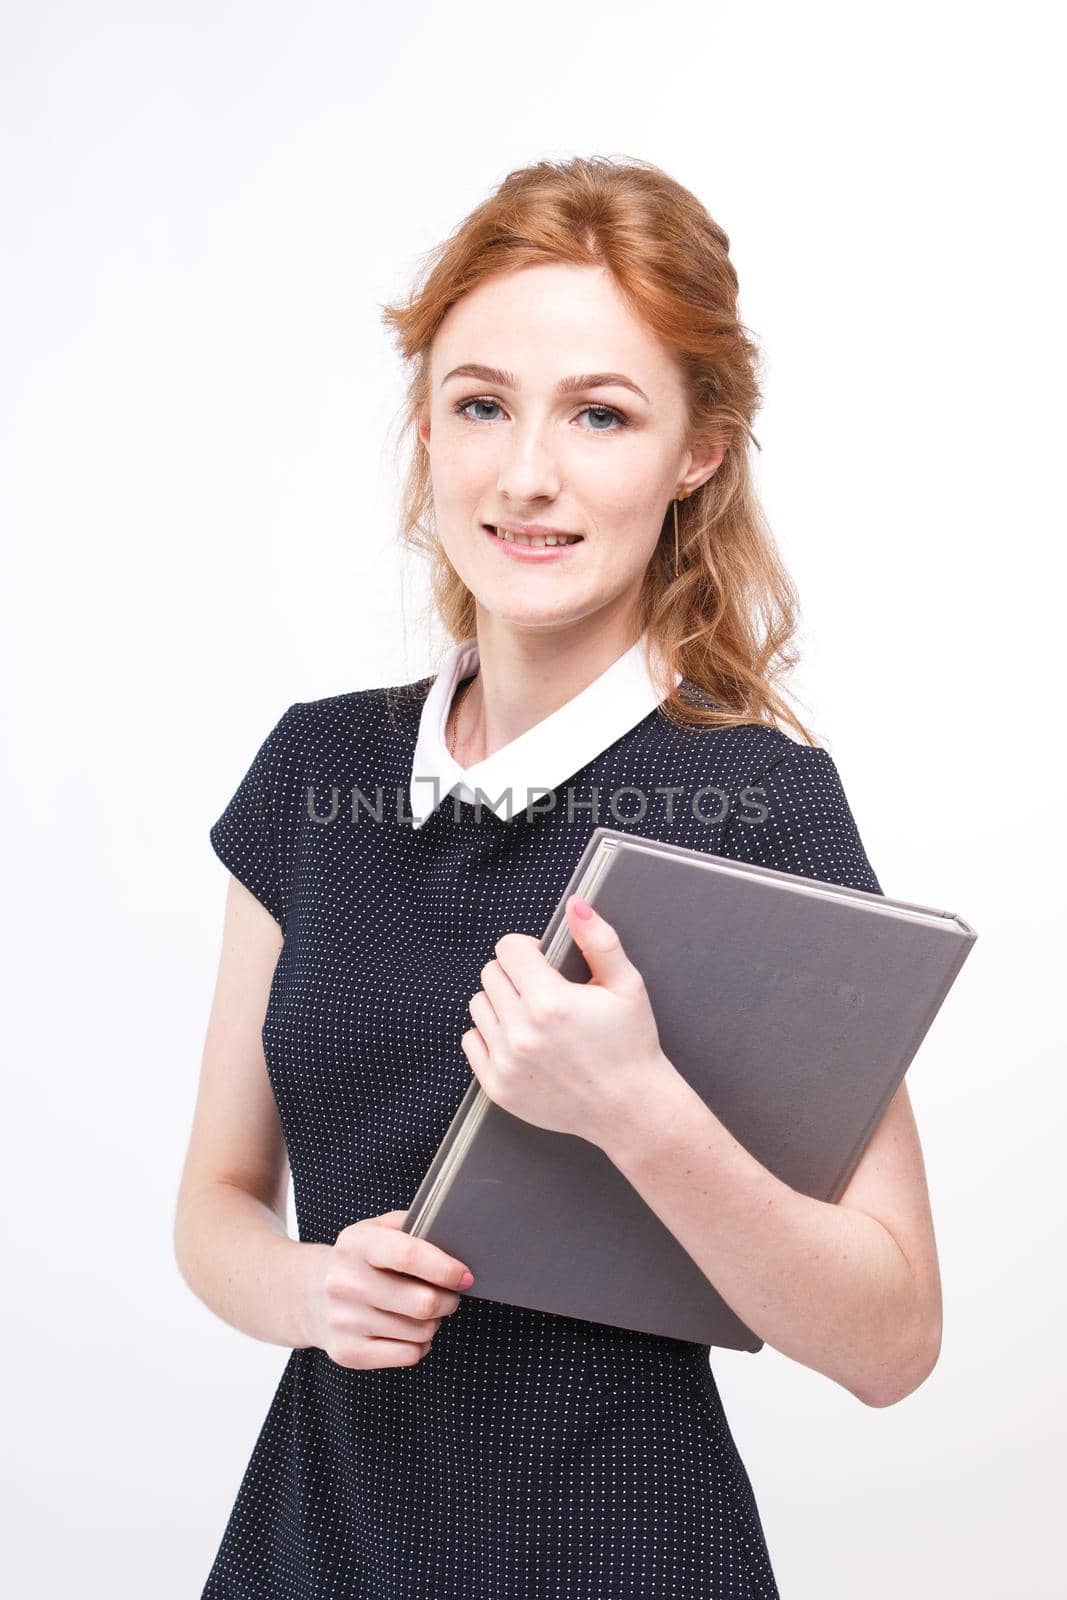 Beautiful girl with red hair and gray book in hands dressed in black dress on white isolated background.